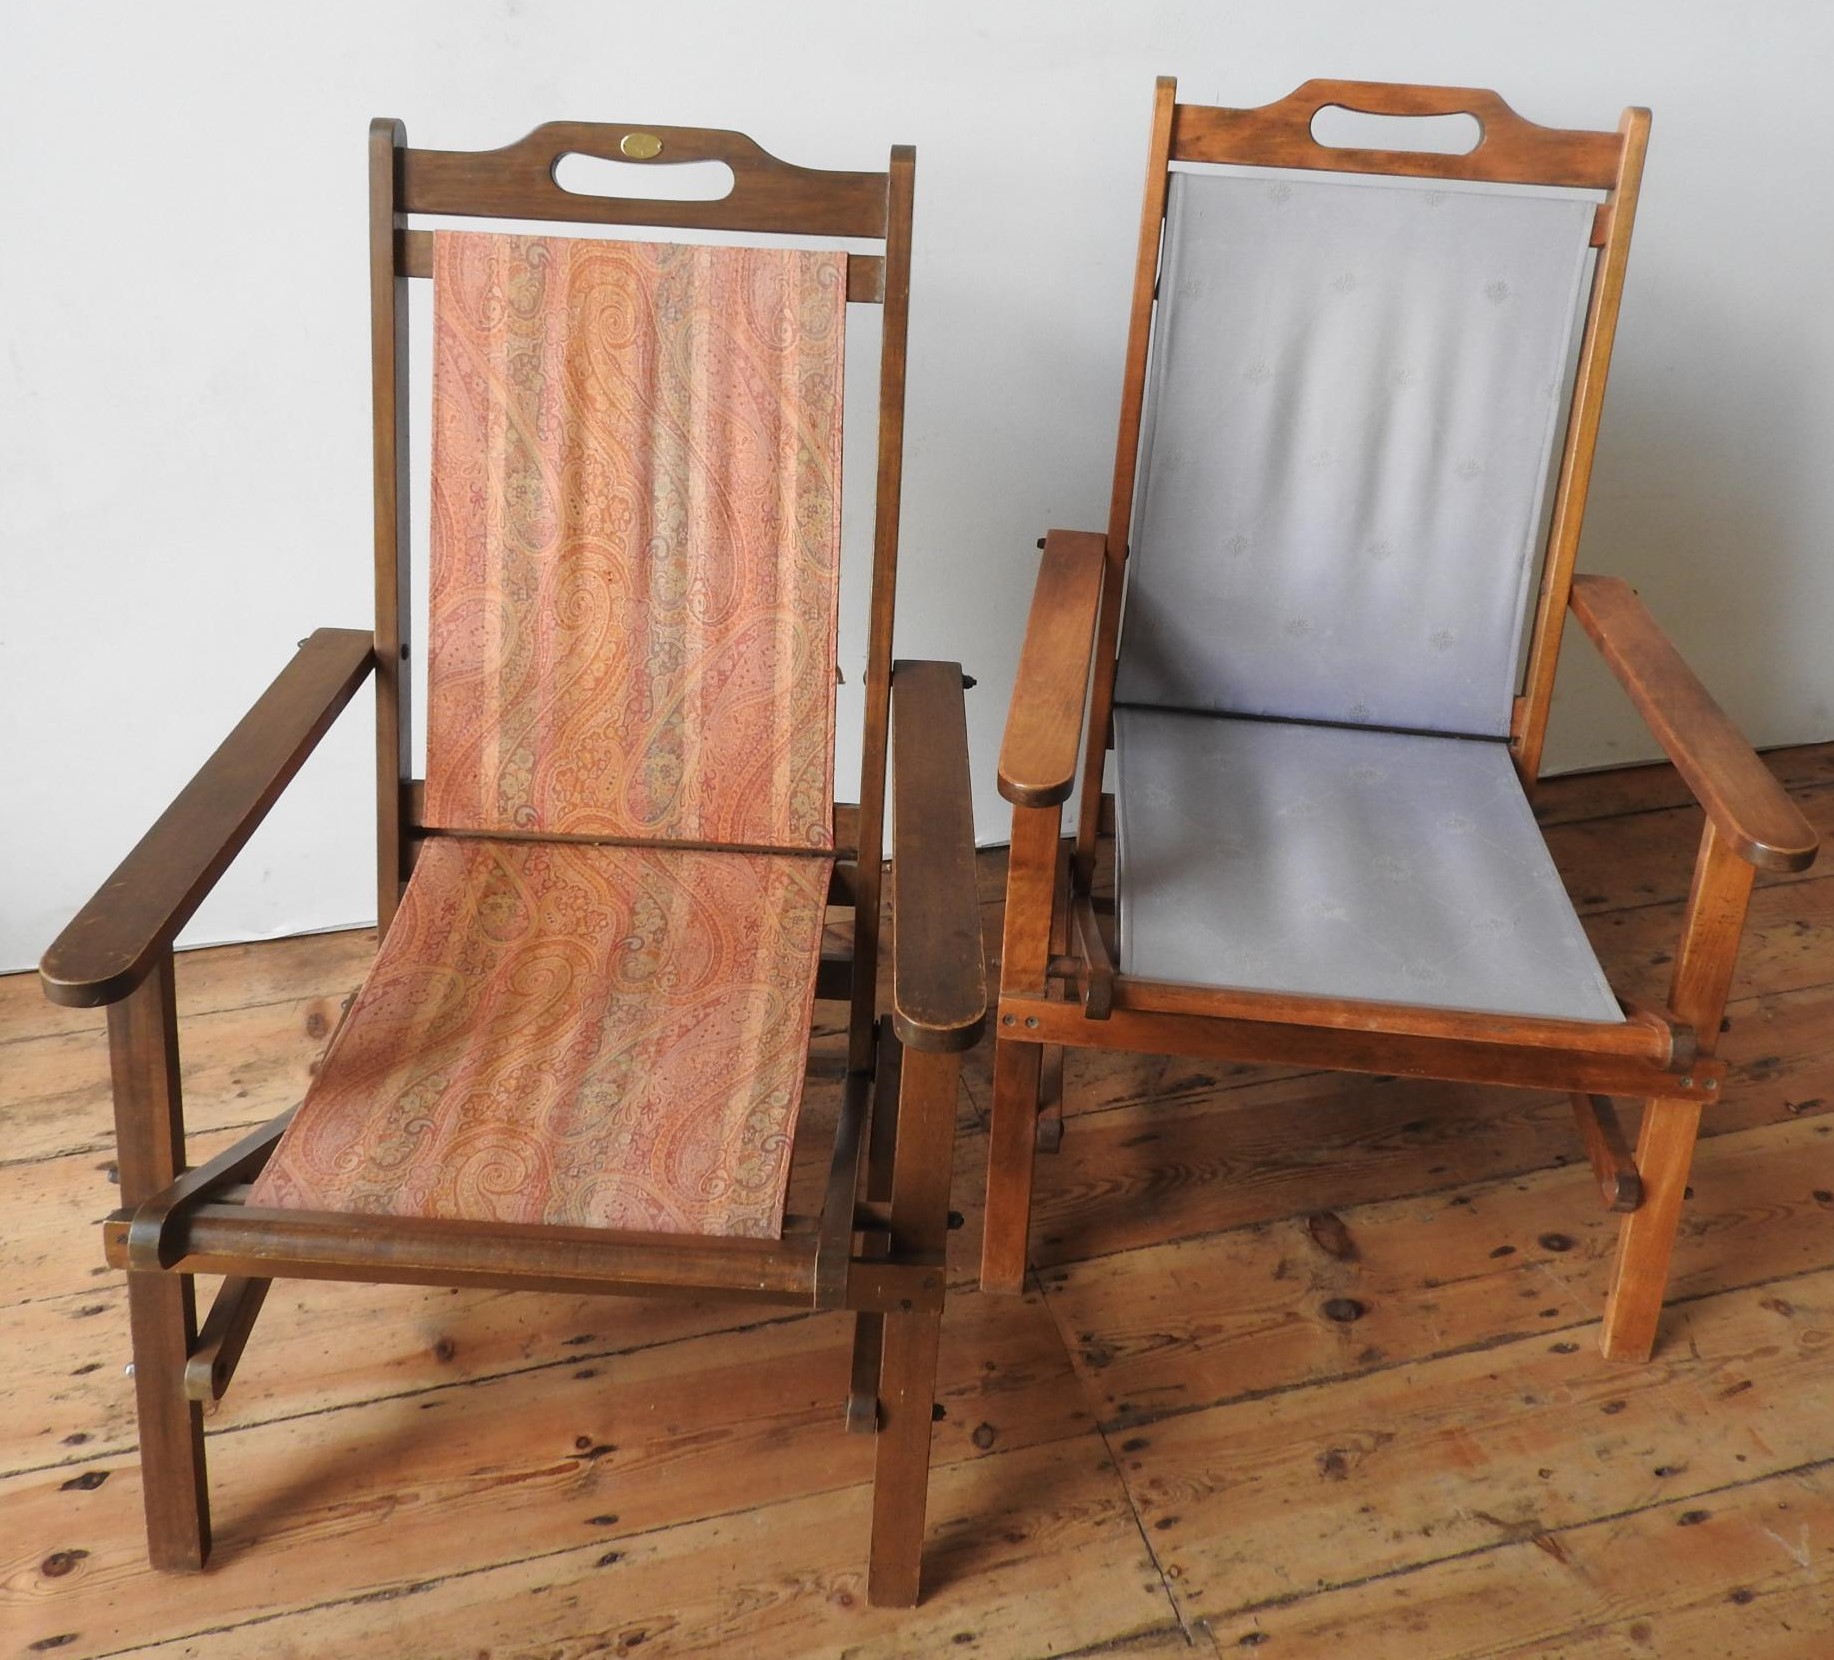 TWO FOLDING WOODEN PATIO CHAIRS WITH LOOSE CANVAS SEATS AND BACKS, ONE CHAIR BEARING A MULBERRY